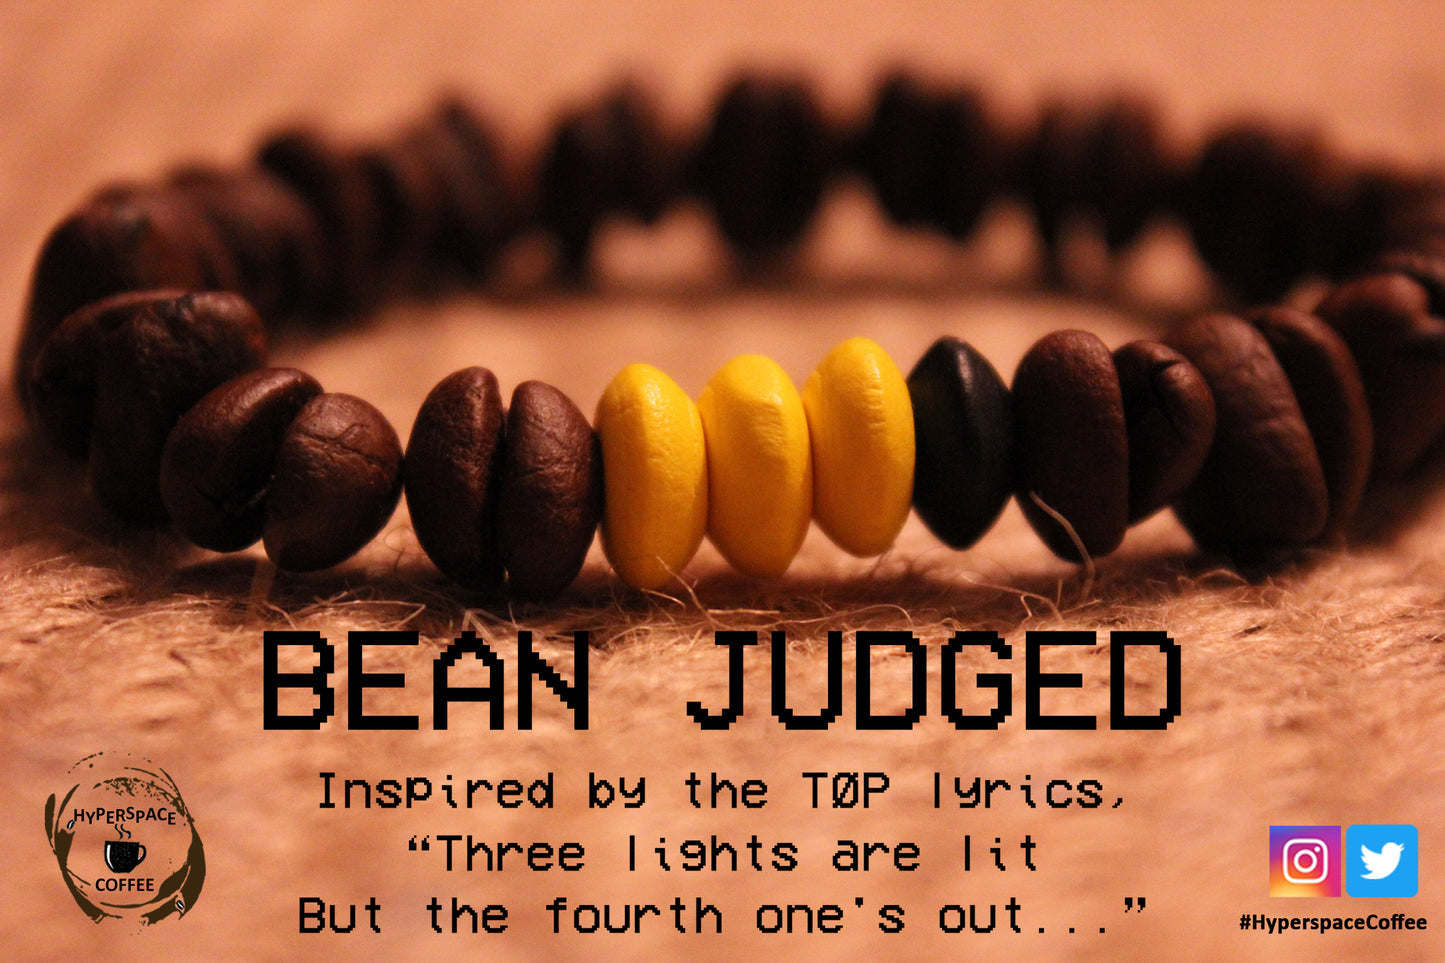 Twenty One Pilots - The Judge inspired - Bean Judged - Real Coffee Bracelet - "Three lights are lit But the fourth one's out..." - Shipping Included